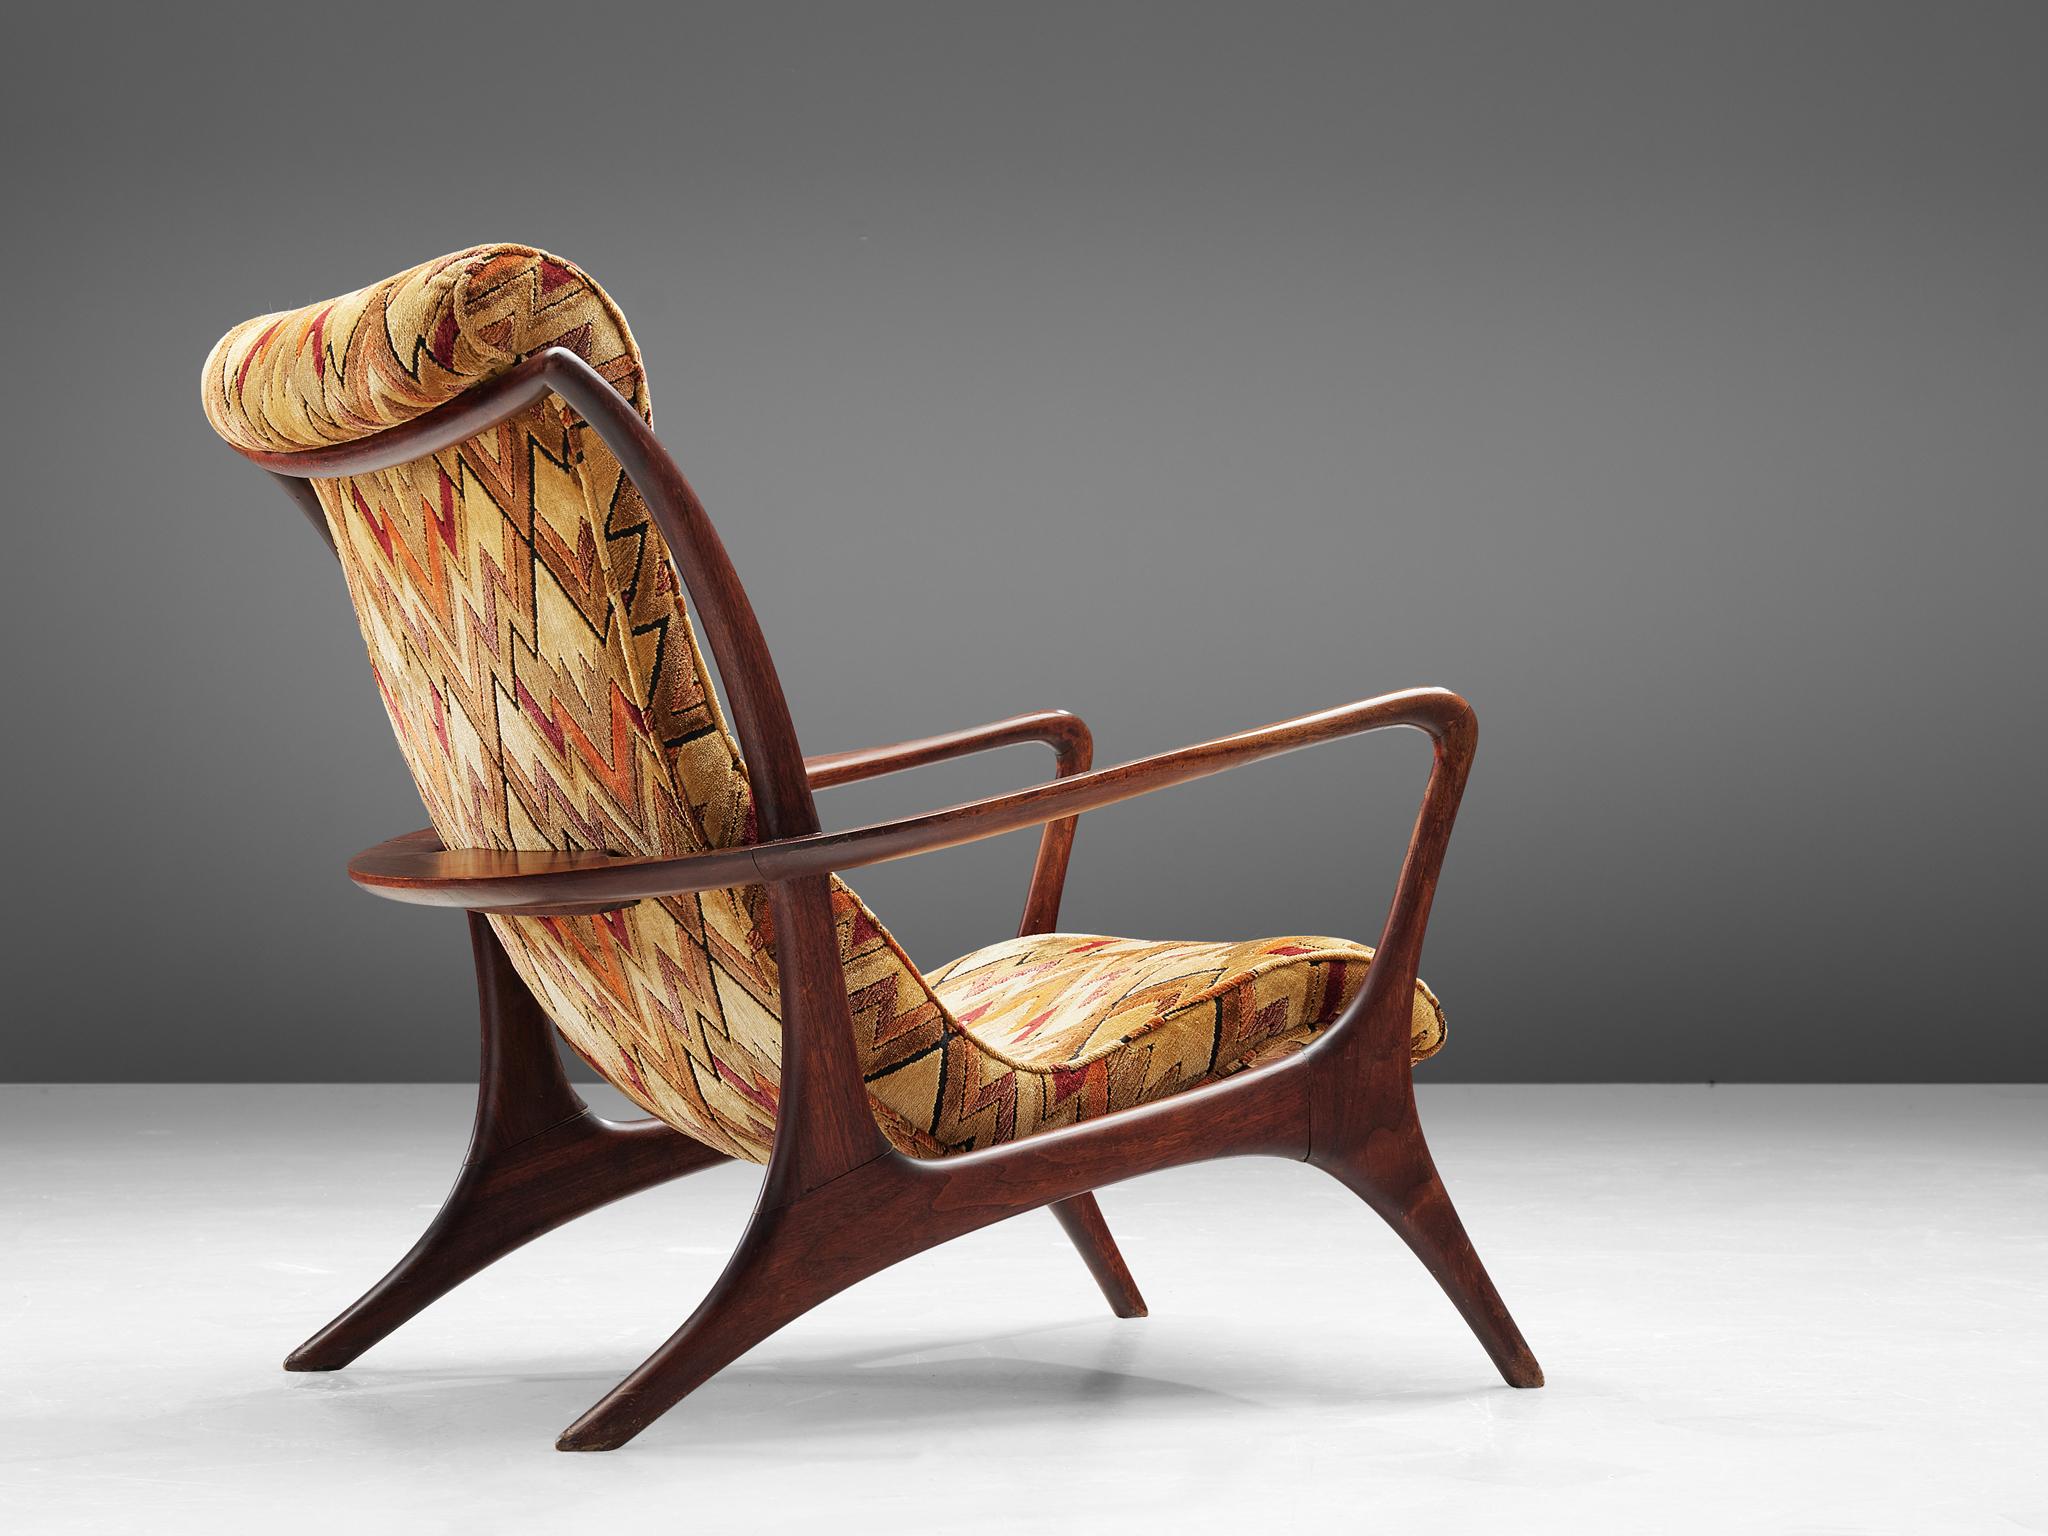 Vladimir Kagan for Dreyfuss, 'Contour' high back chair, teak and fabric, United States, 1953

This lounge chair by Kagan is sculptural and delicate. The frame, executed in teak and carved in an exquisite manner. The hind legs are long and protrude